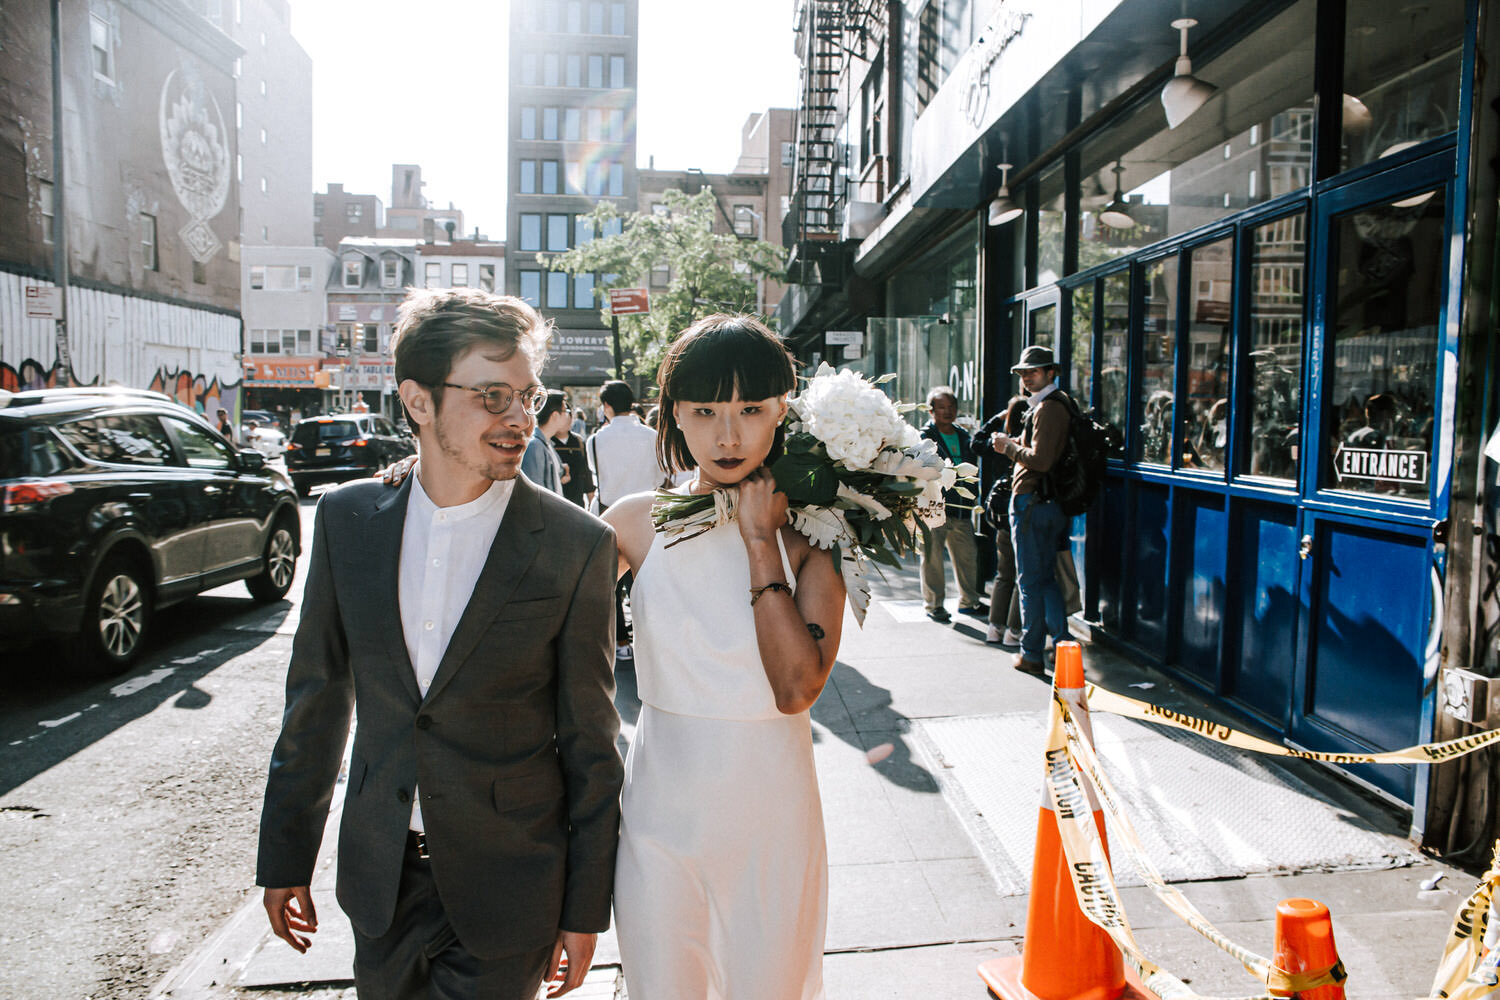 new york lowwer east side wedding intimate ceremony eclectic modern23.jpg